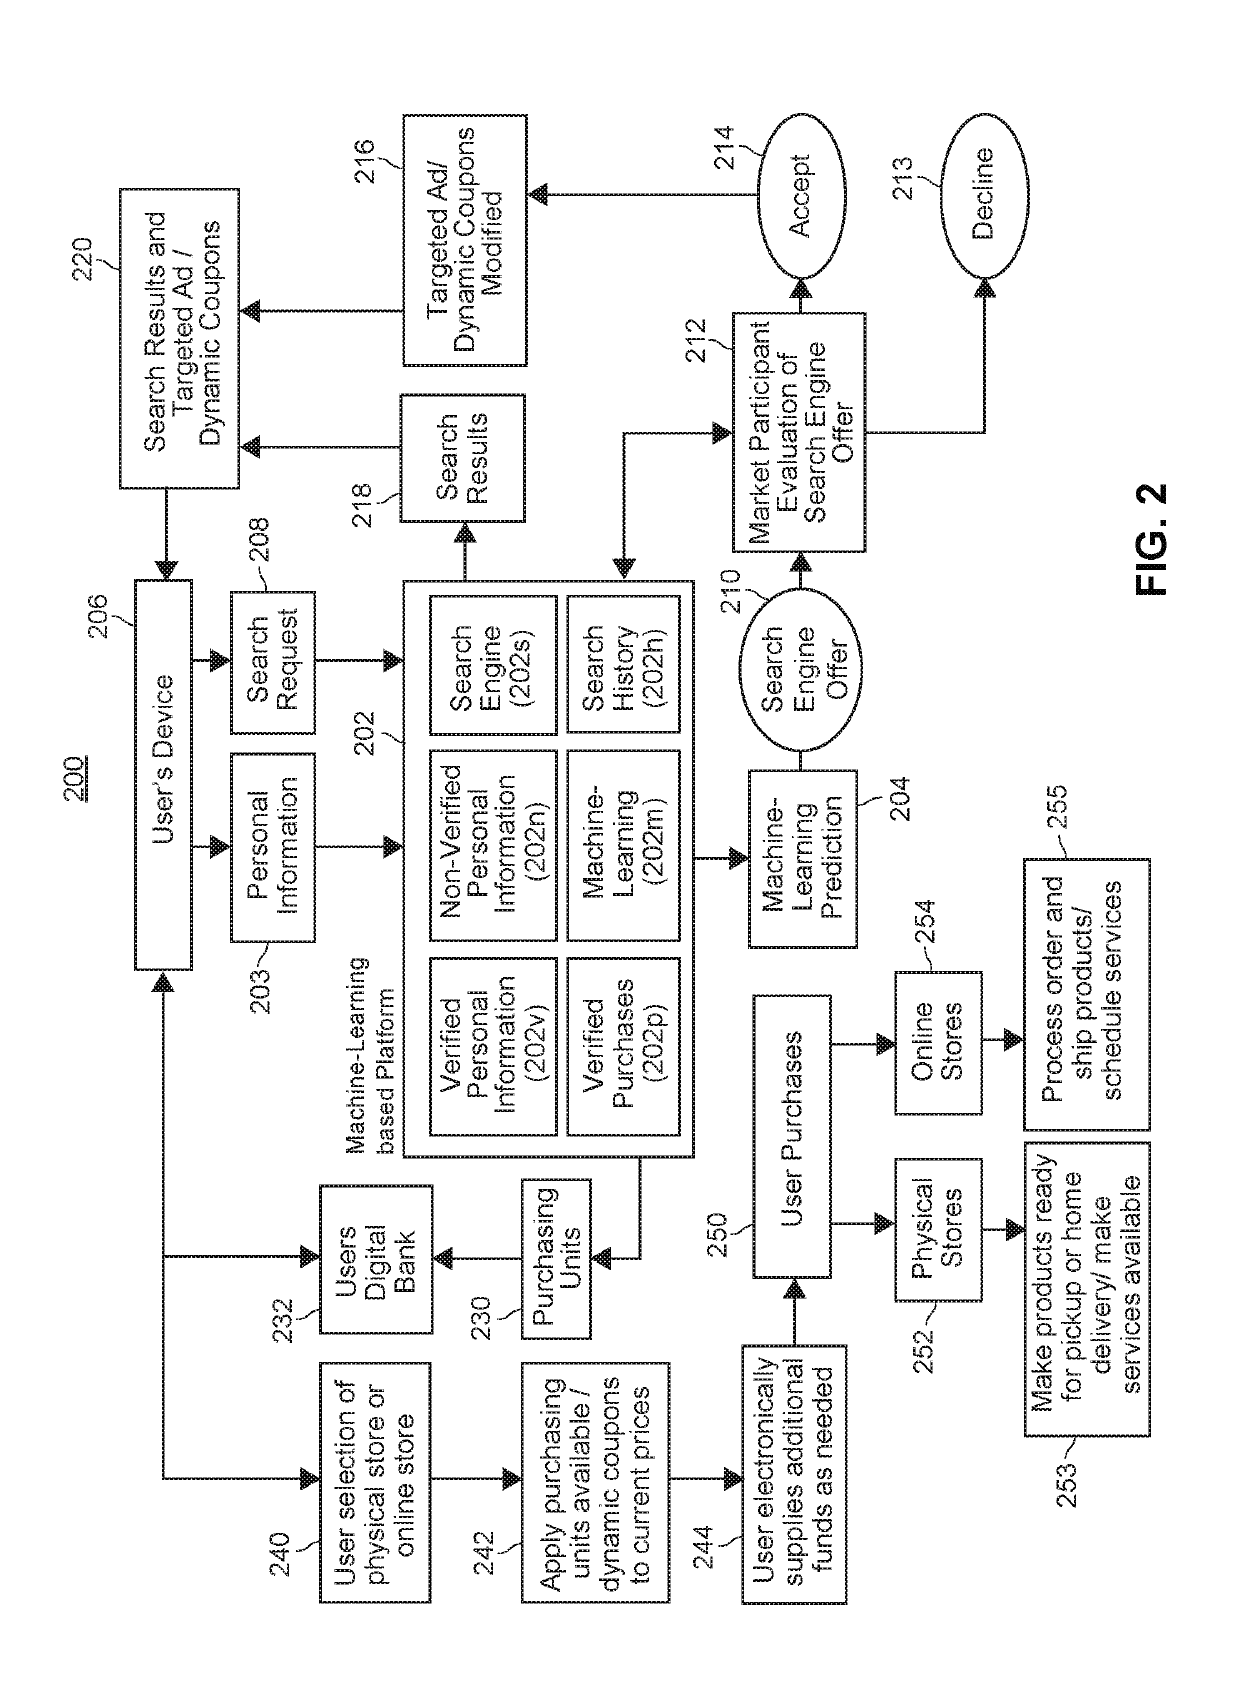 Machine-learning based systems and methods for optimizing search engine results